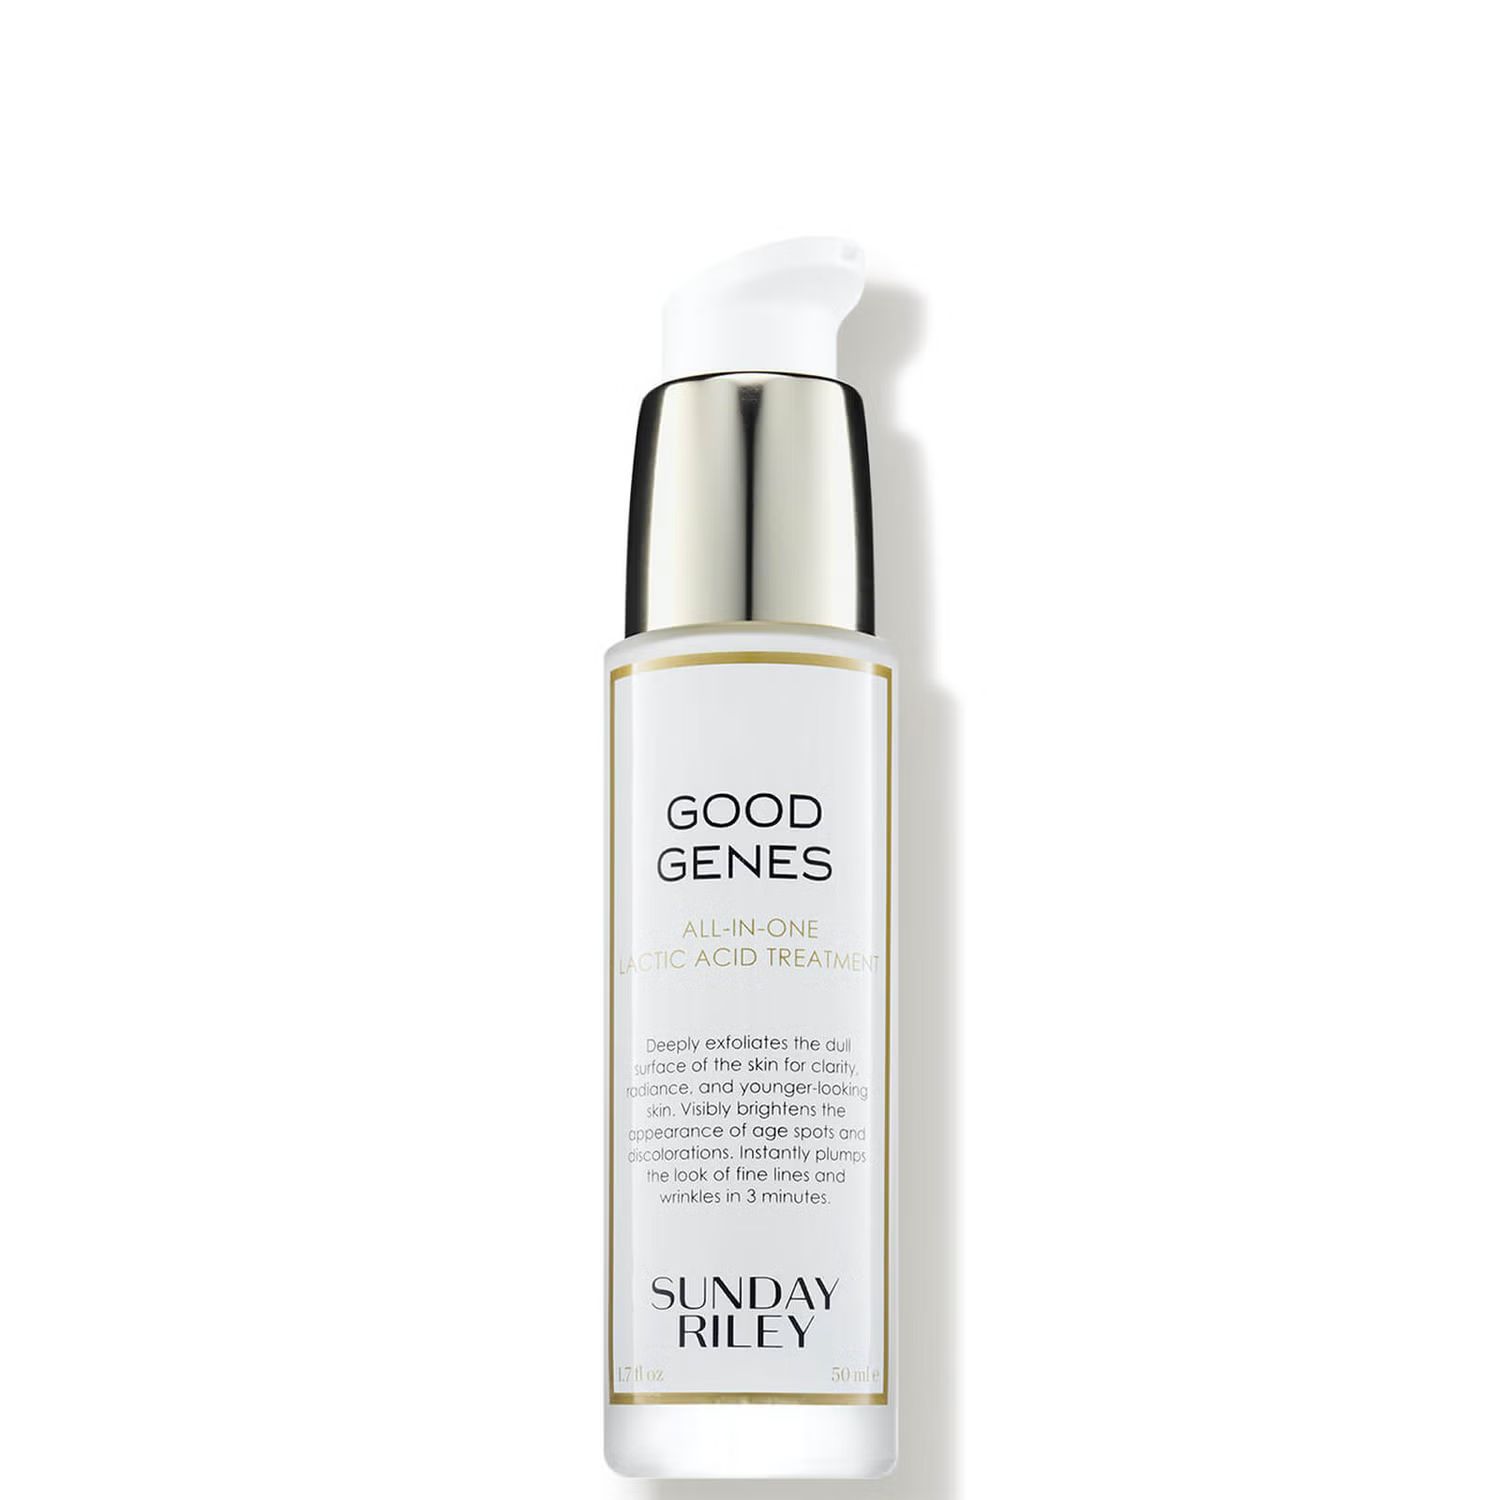 Sunday Riley Good Genes All-In-One Lactic Acid Treatment 1.7oz | Dermstore (US)